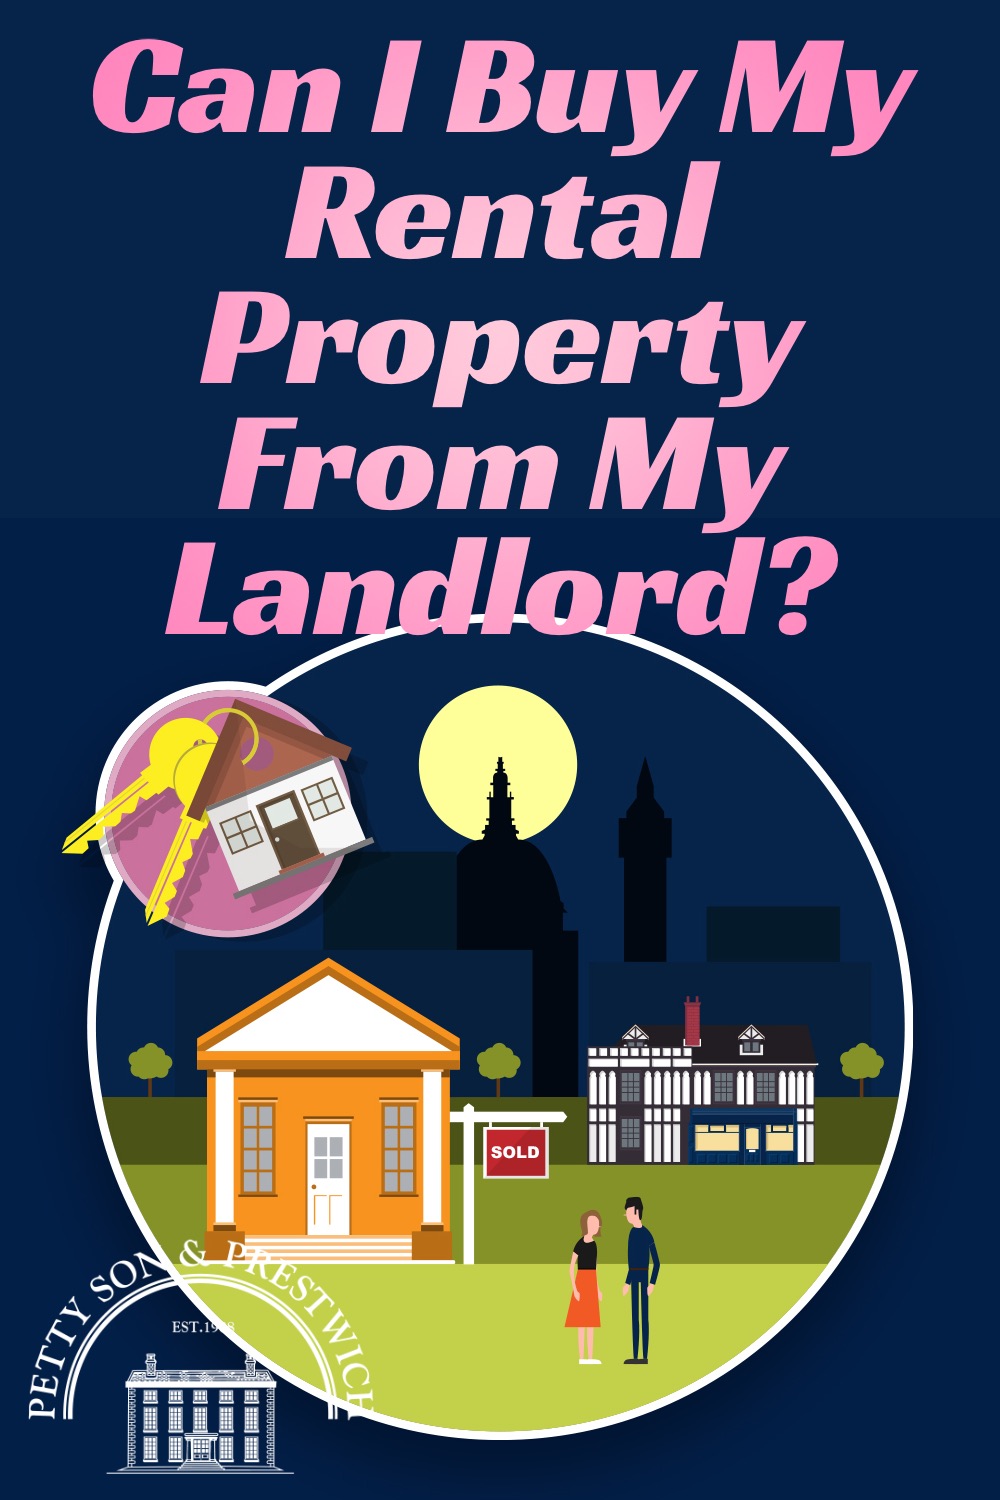 Can I Buy My Rental Property From My Landlord